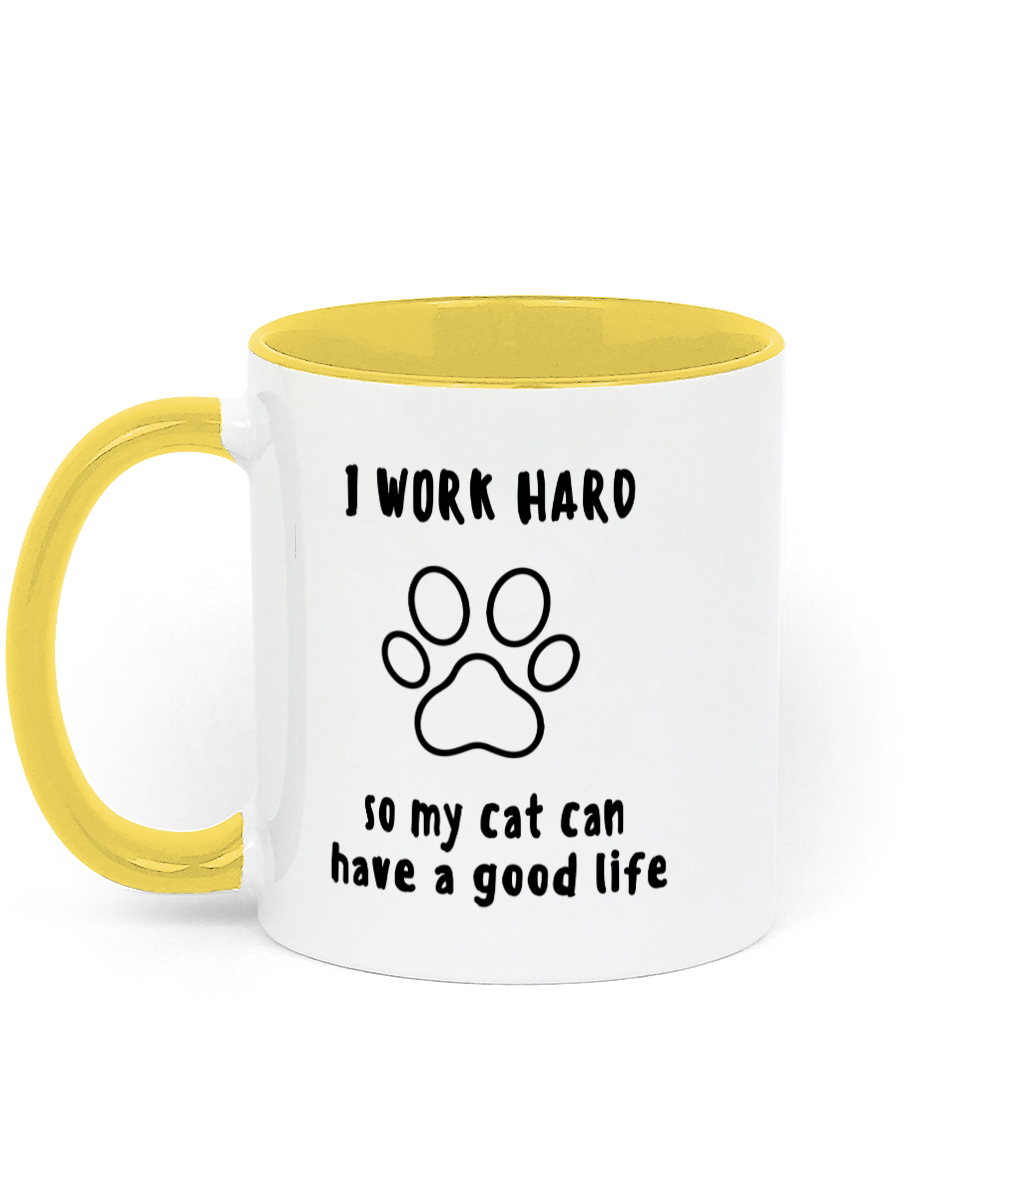 I Work Hard so My Cat Can Have a Good life. 11 oz mug. Cat Lover. Perfect Gift.Two-Toned. Yellow.